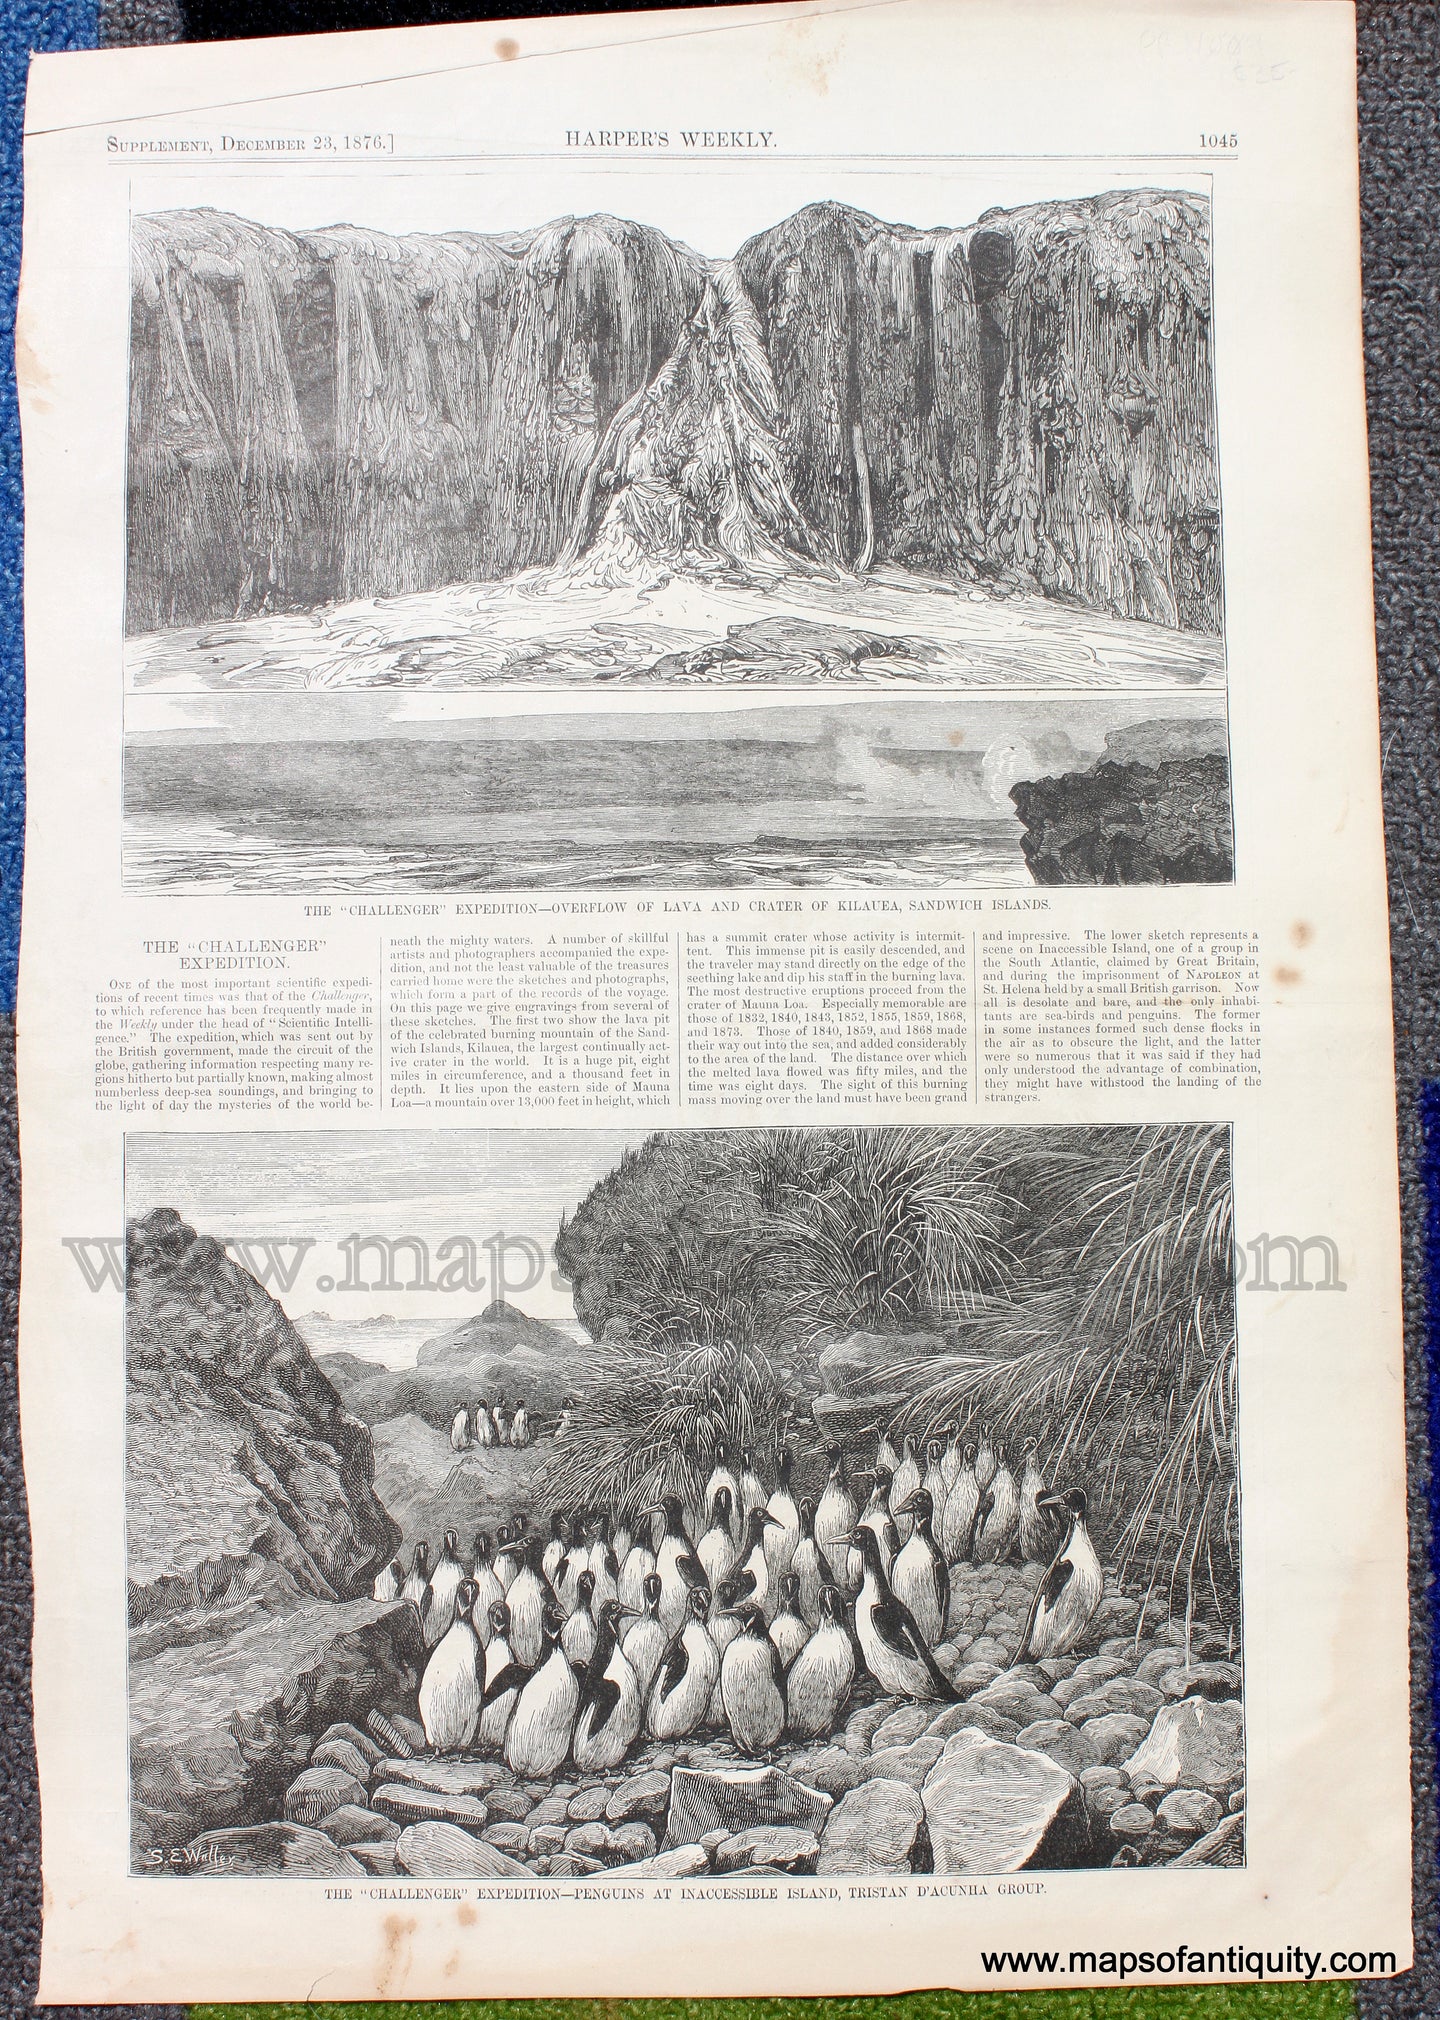 Antique-Black-and-White-Print-The-Challenger-Expedition---Overflow-of-Lava-and-Crater-of-Kilauea-Sandwich-Islands;-Penguins-at-Inaccessible-Island-Tristan-D'Acunha-Group-Antique-Prints--1876-Harper's-Weekly-Maps-Of-Antiquity-1800s-19th-century